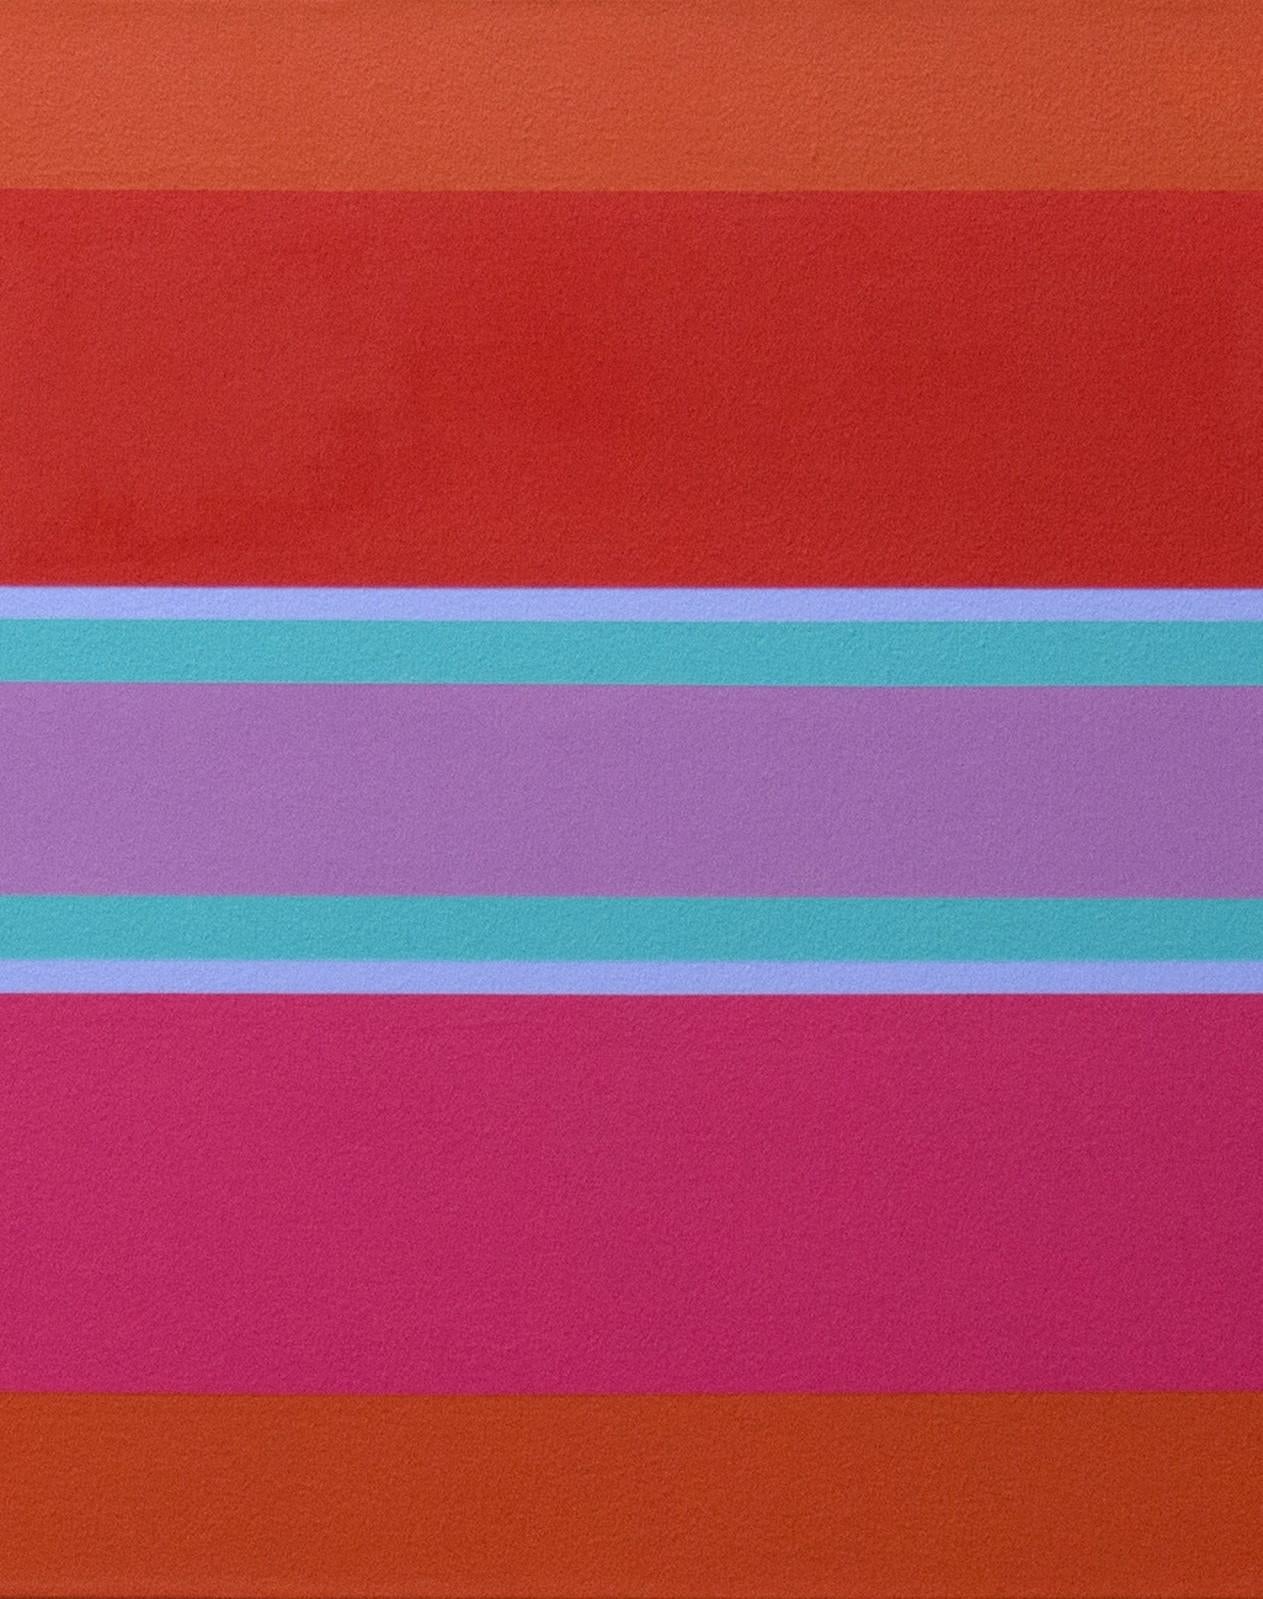 Horizontal bands of fire-orange, rose pink, mauve and turquoise float on a ground of carrot orange. The poised composition in this acrylic painting is a meditation on the intersection of music, color and form. Kramer has commented that his lyrical